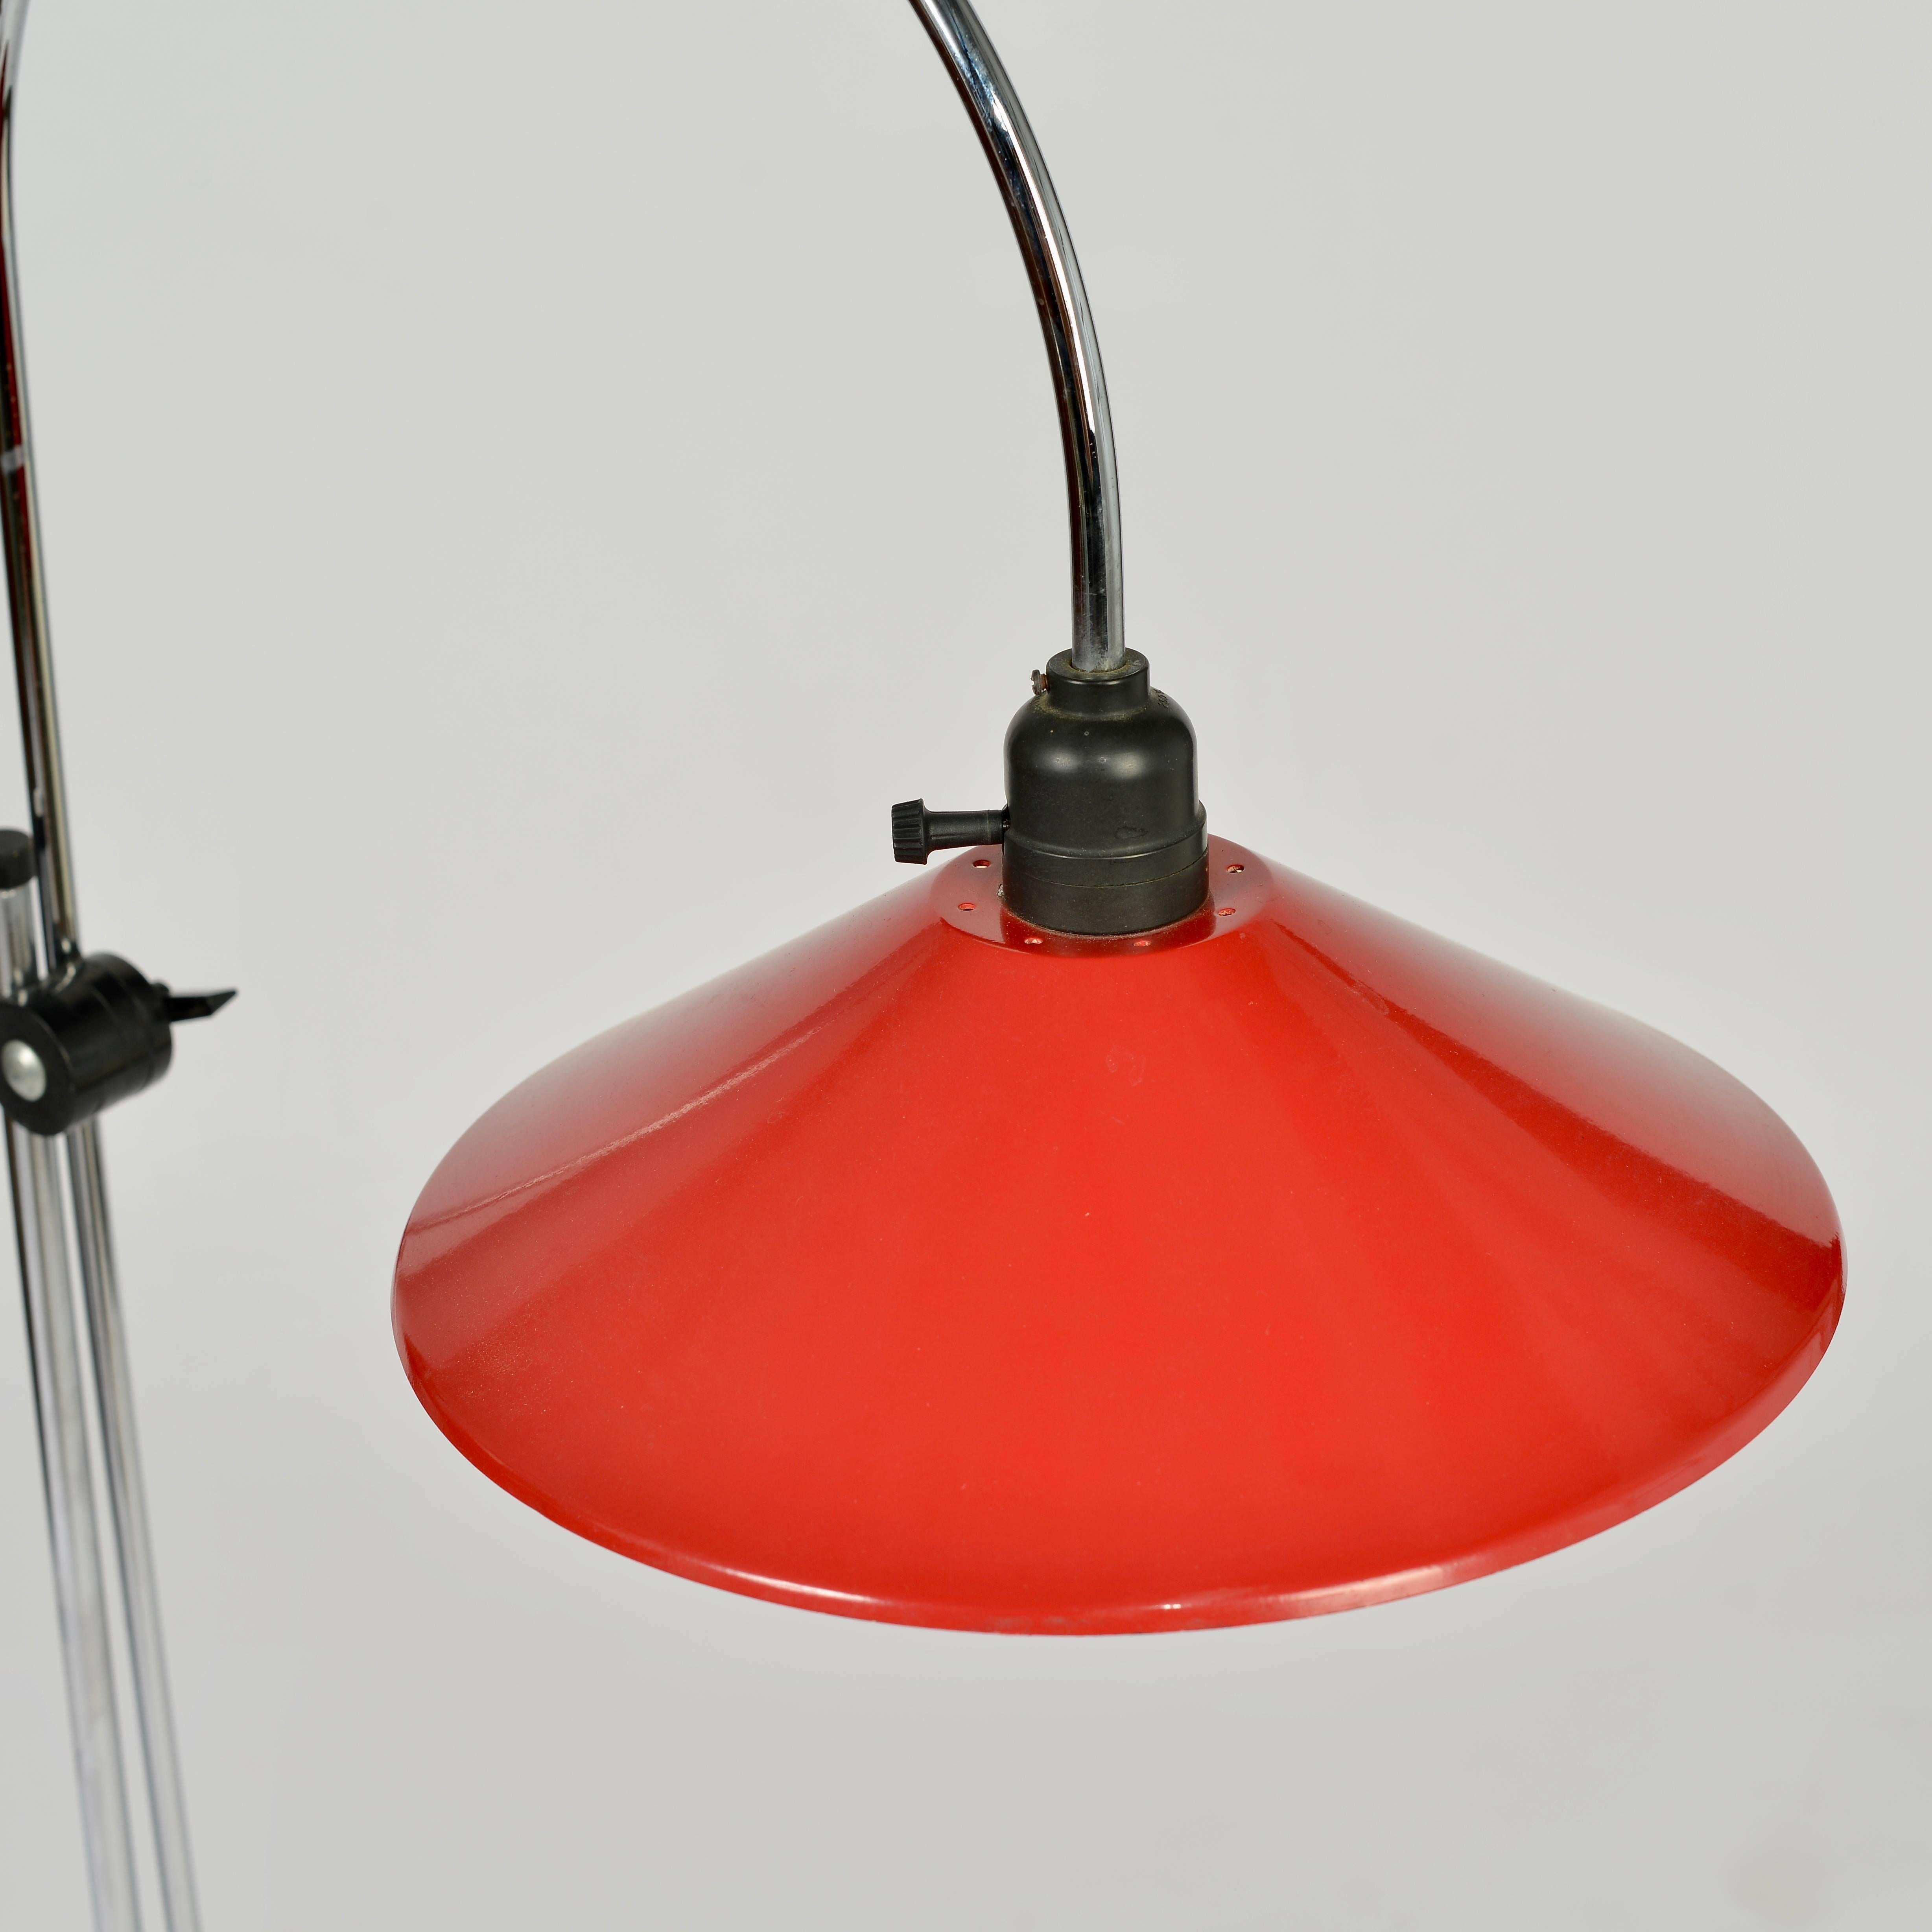 Adjustable Red and Black Italian Modern Floor Lamp In Excellent Condition For Sale In Los Angeles, CA